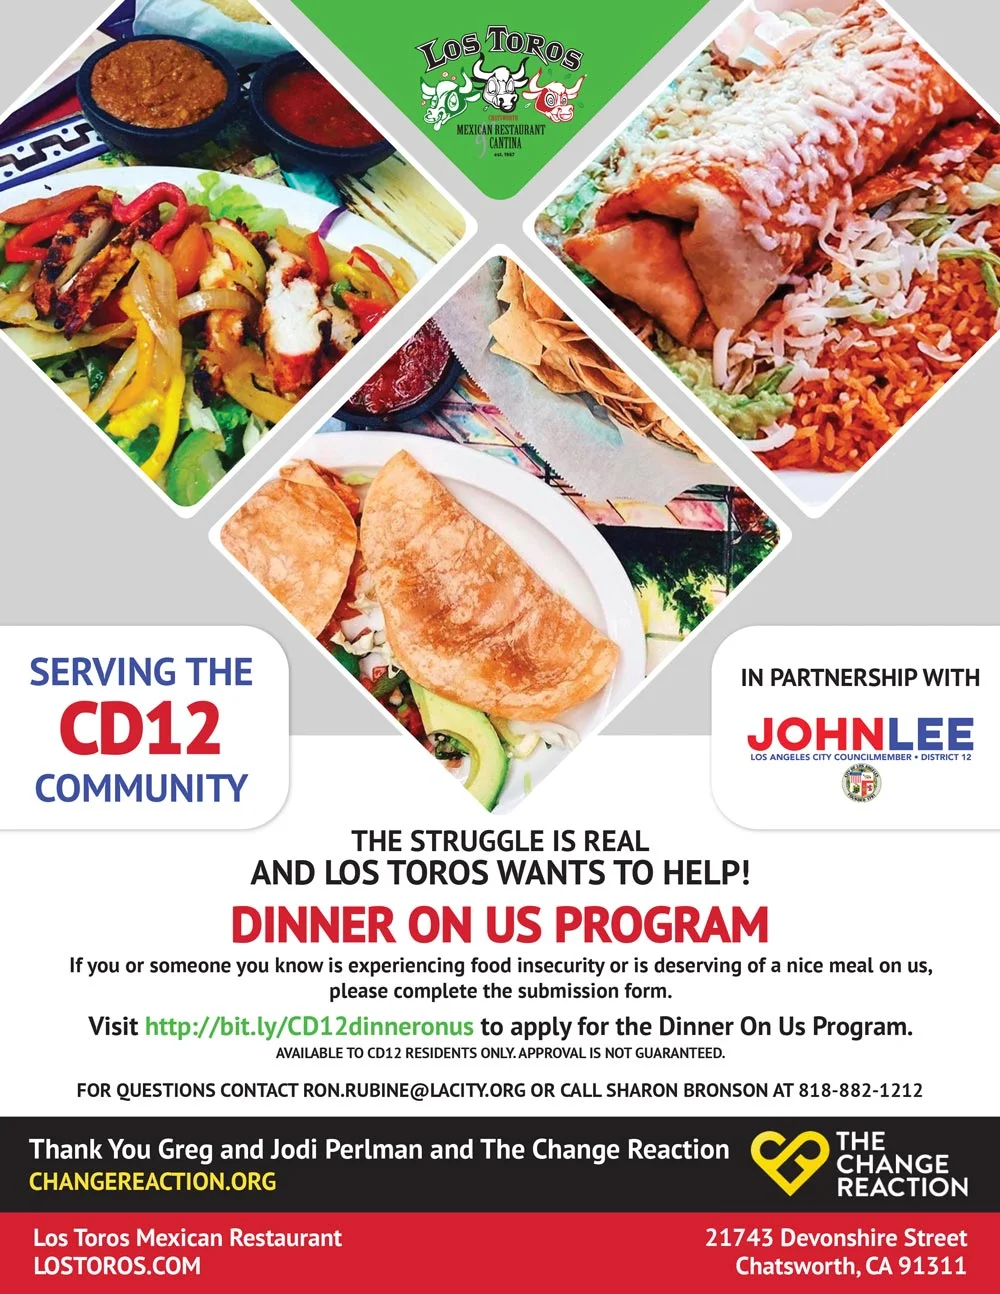 CD12 Partners with Los Toros for the “Dinner On Us” Program